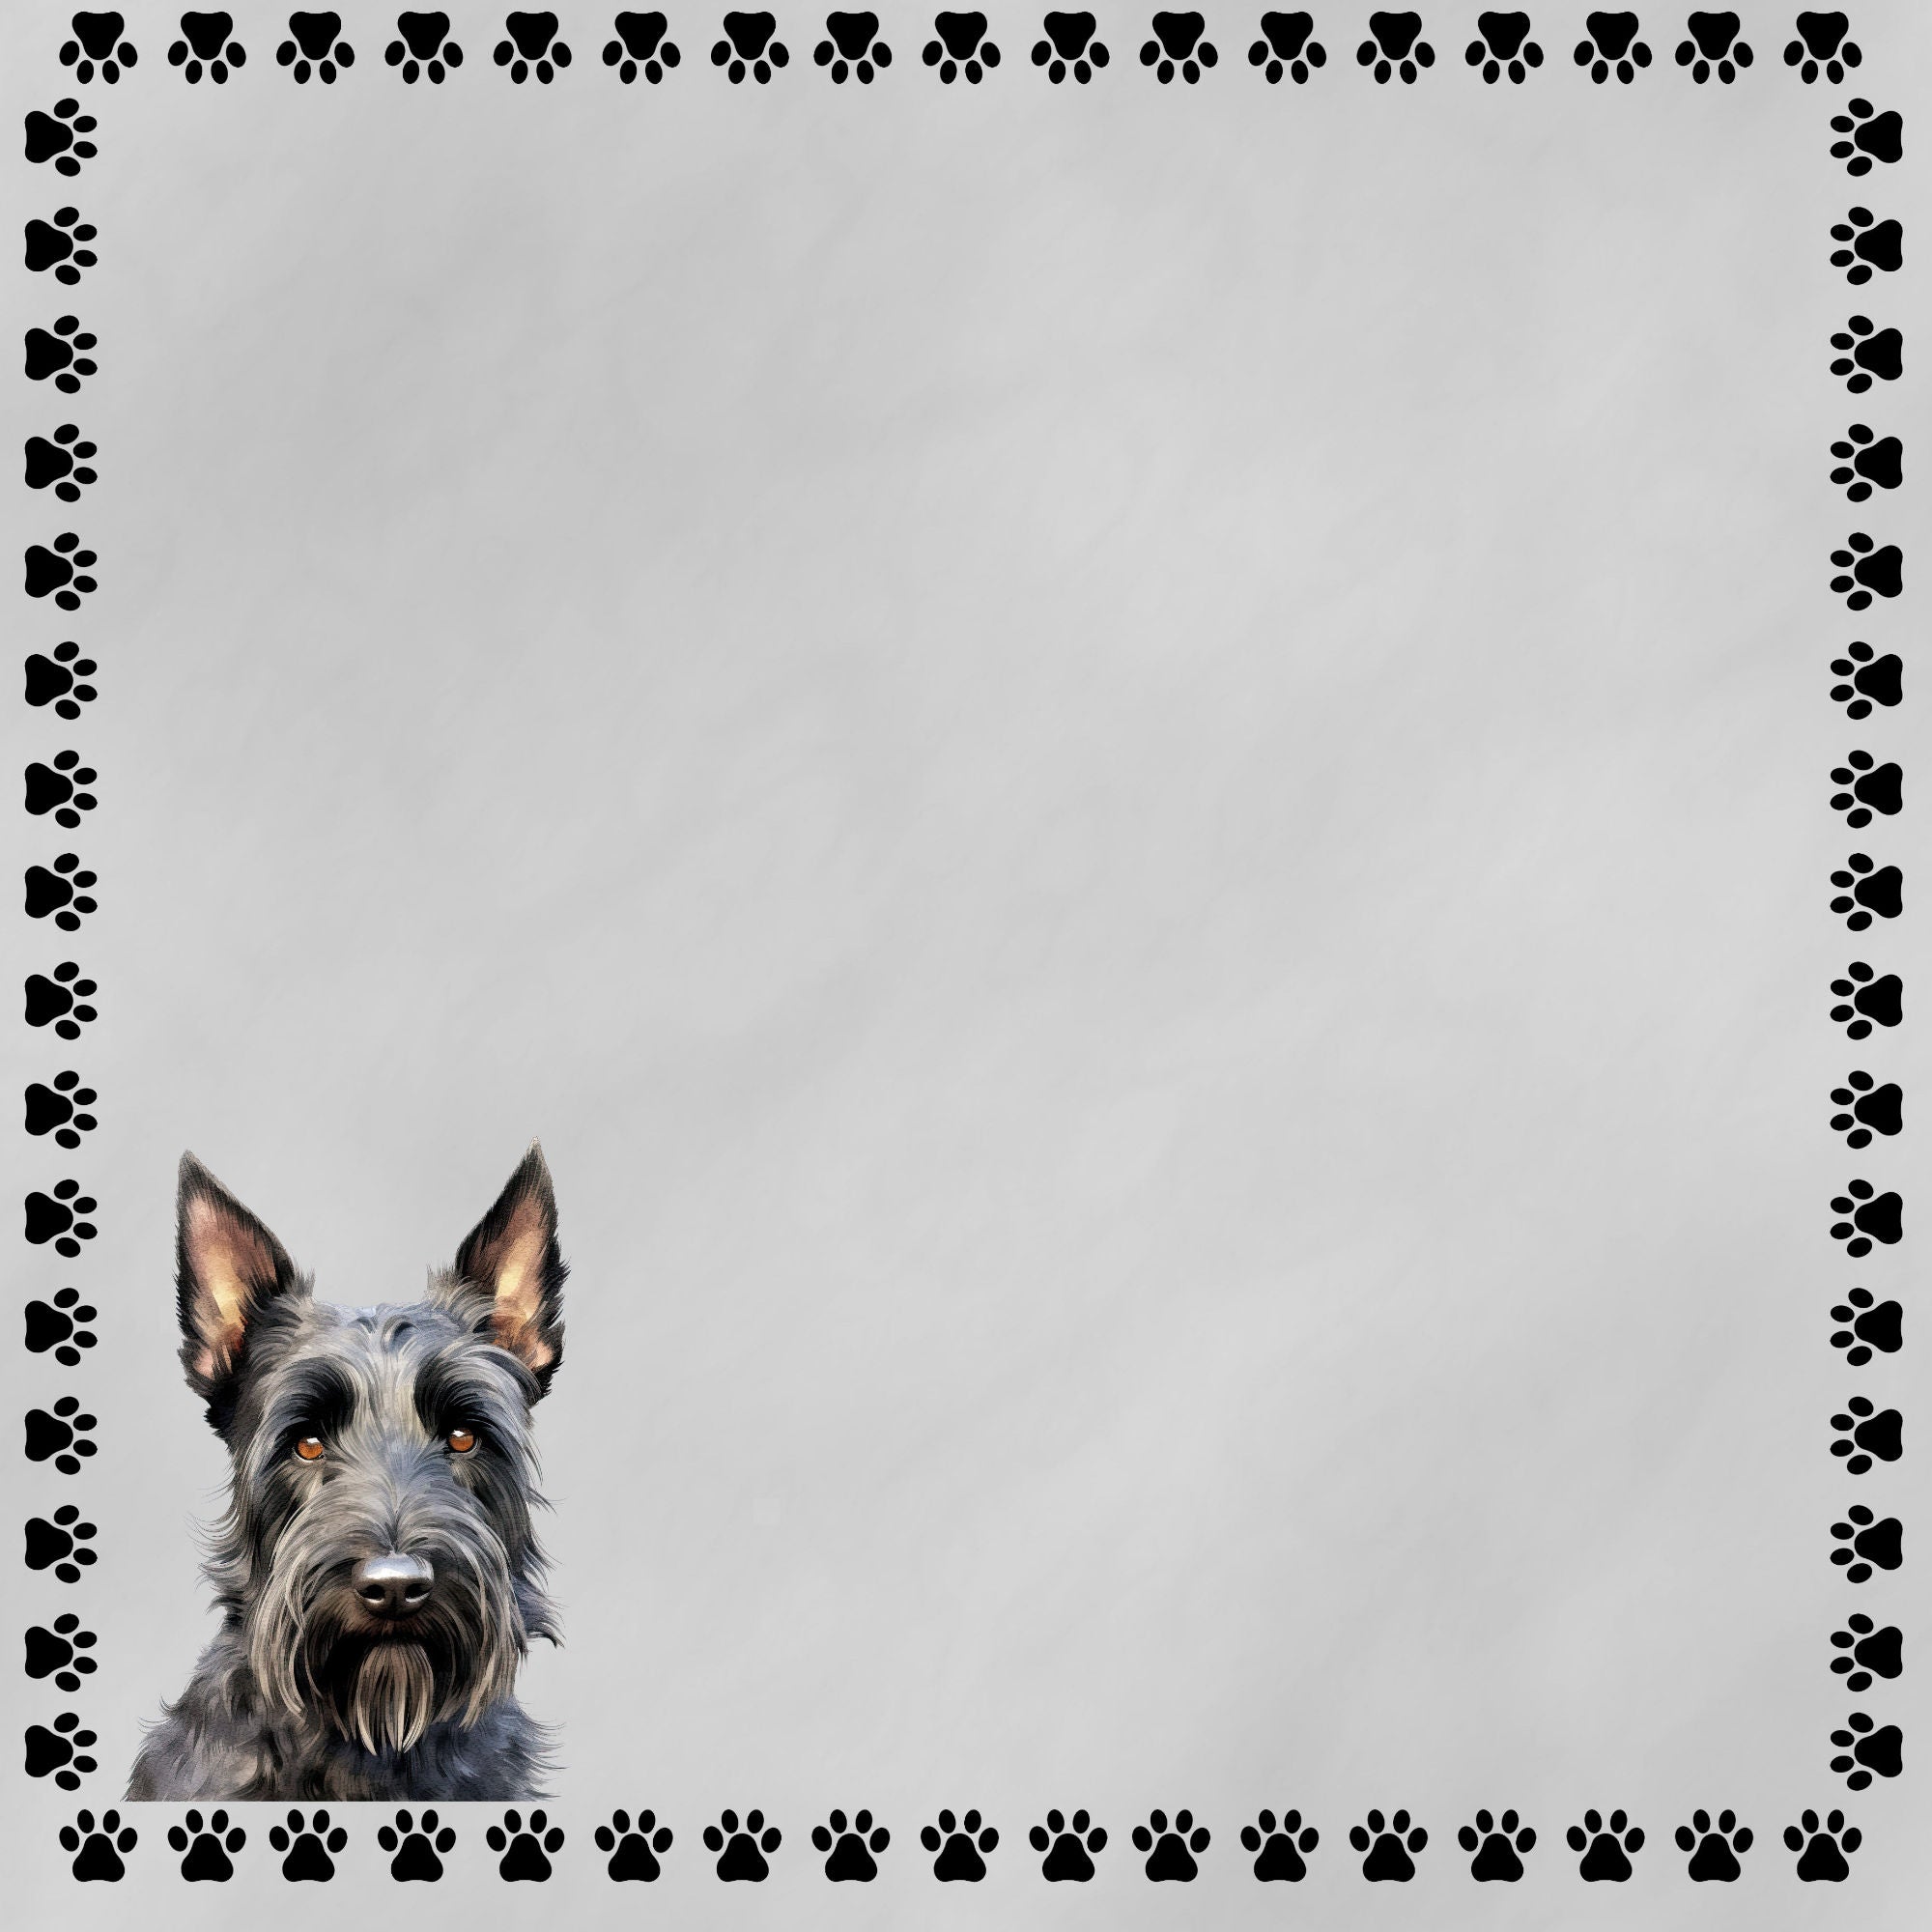 Dog Breeds Collection Scottish Terrier 12 x 12 Double-Sided Scrapbook Paper by SSC Designs